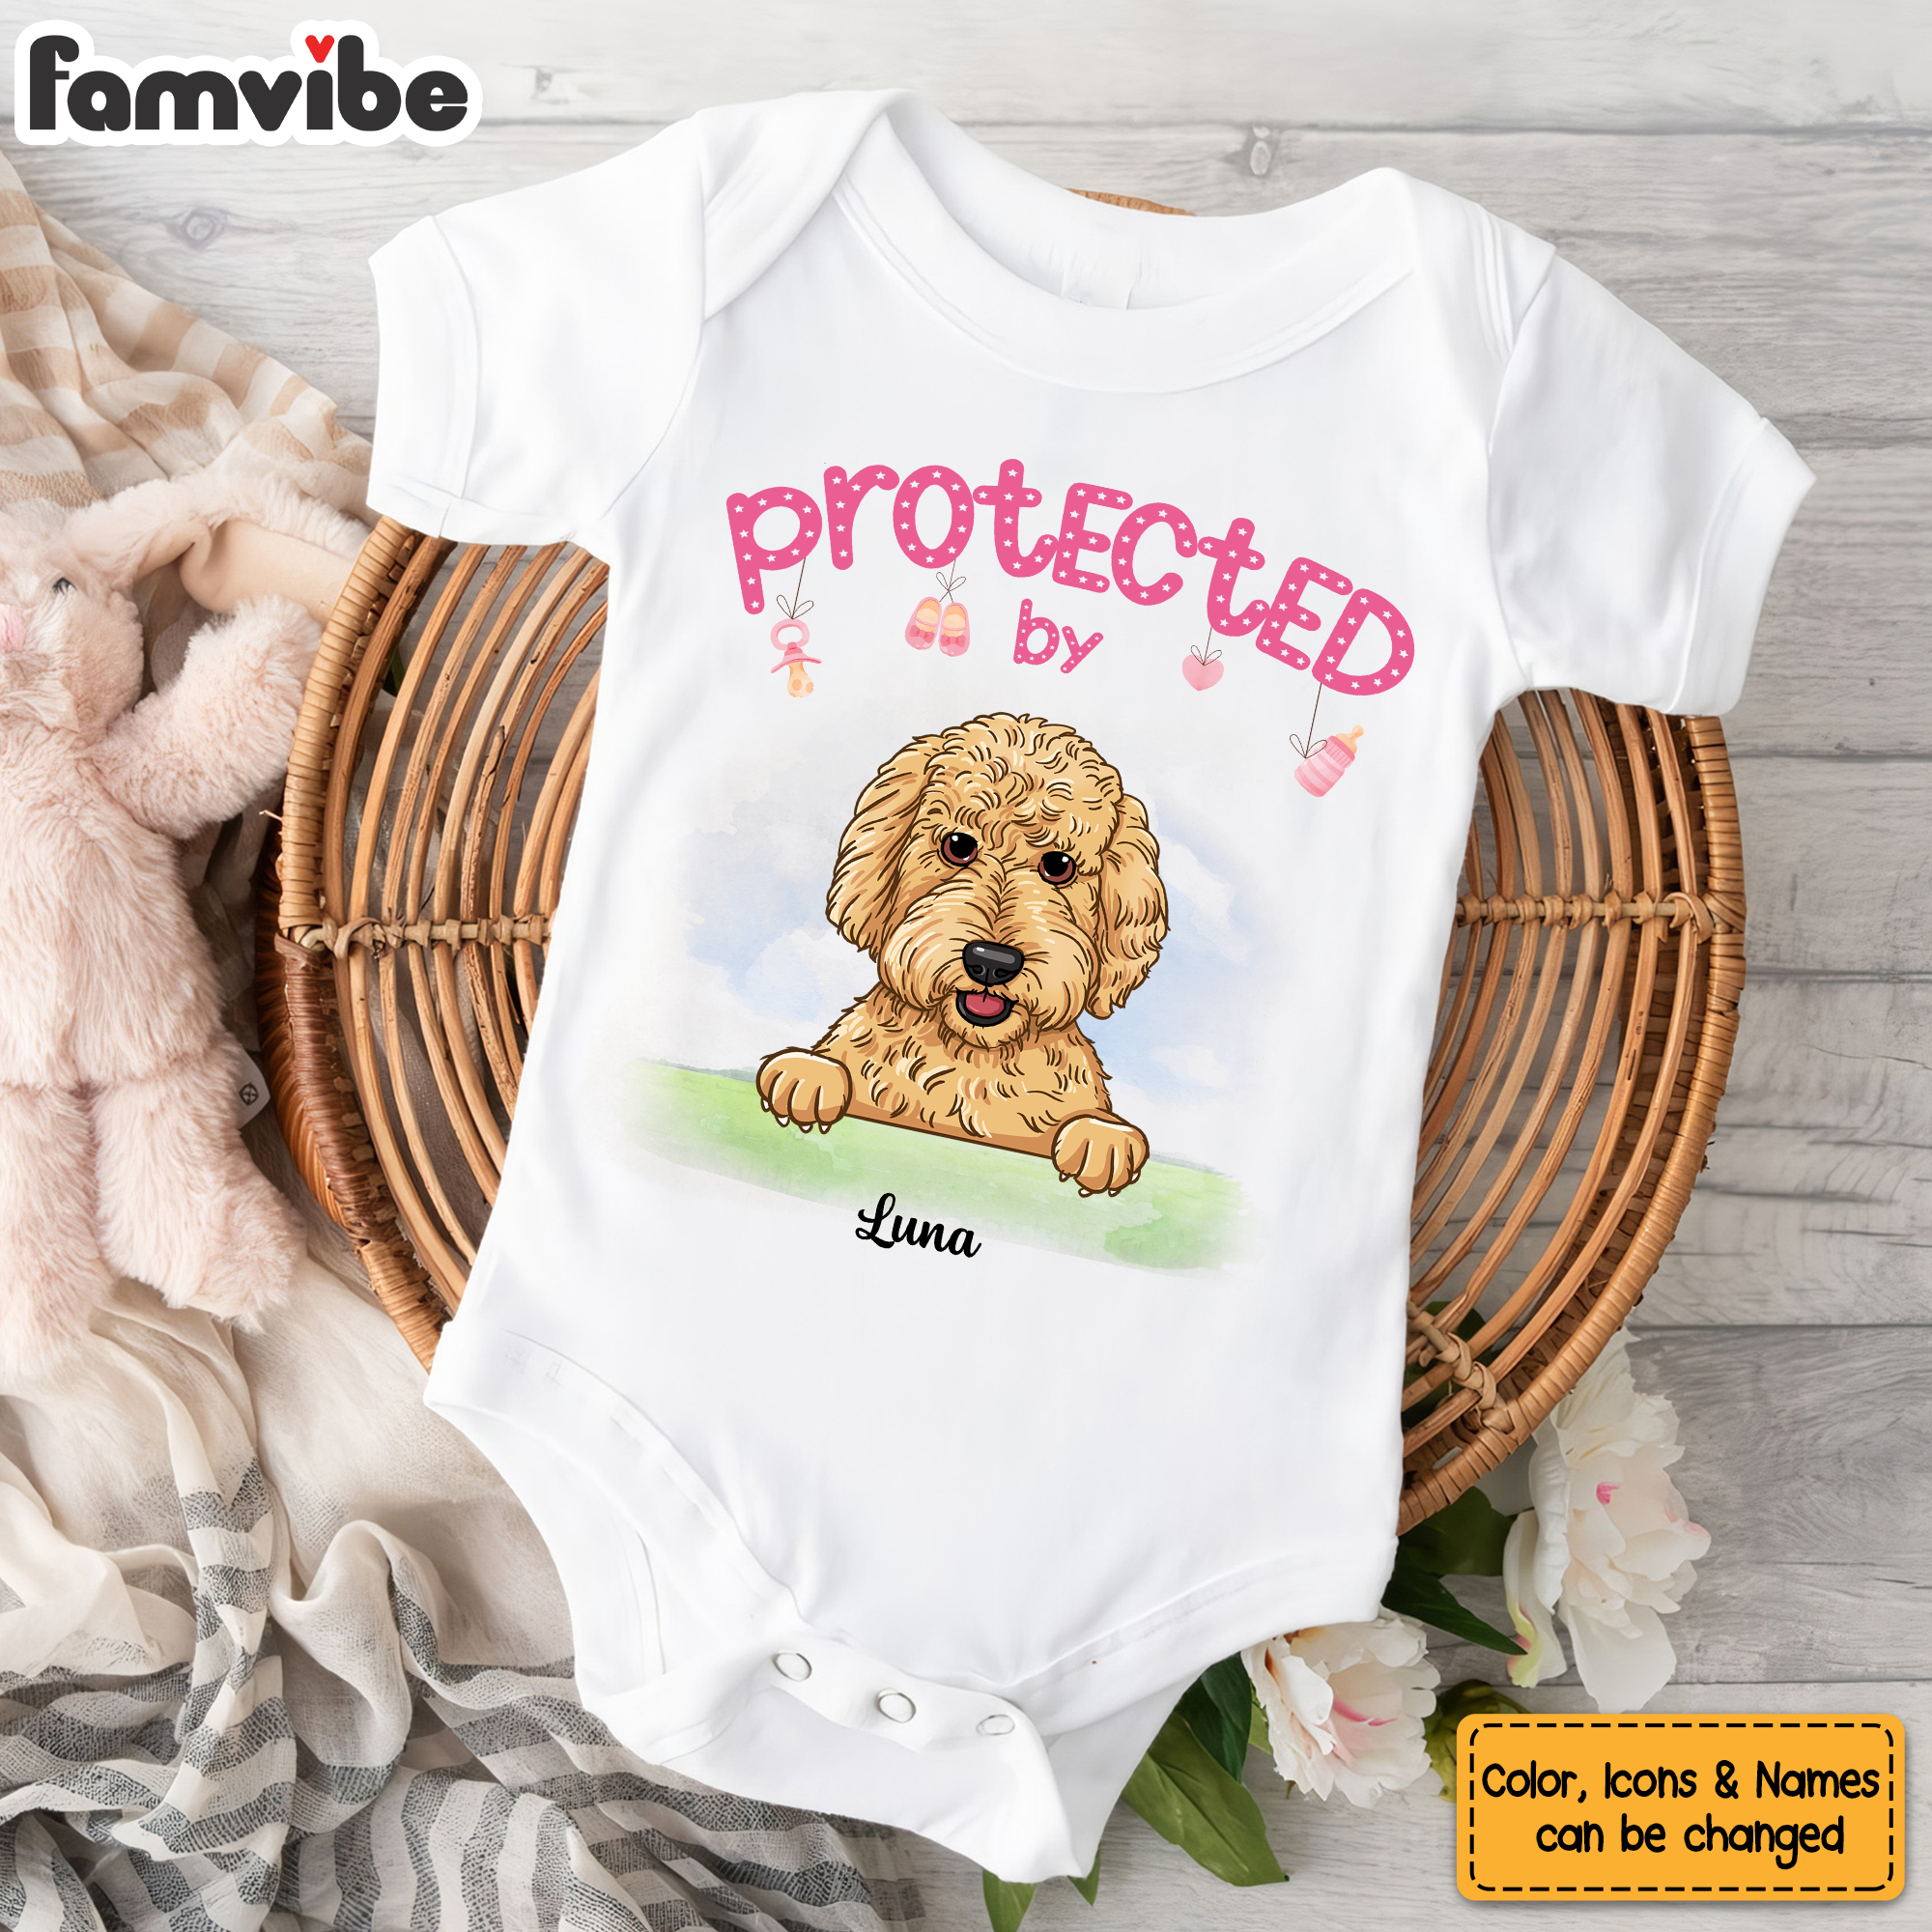 Personalized Gift For Newborn Baby Shower Protected By Dog Baby Onesie 27319 Primary Mockup